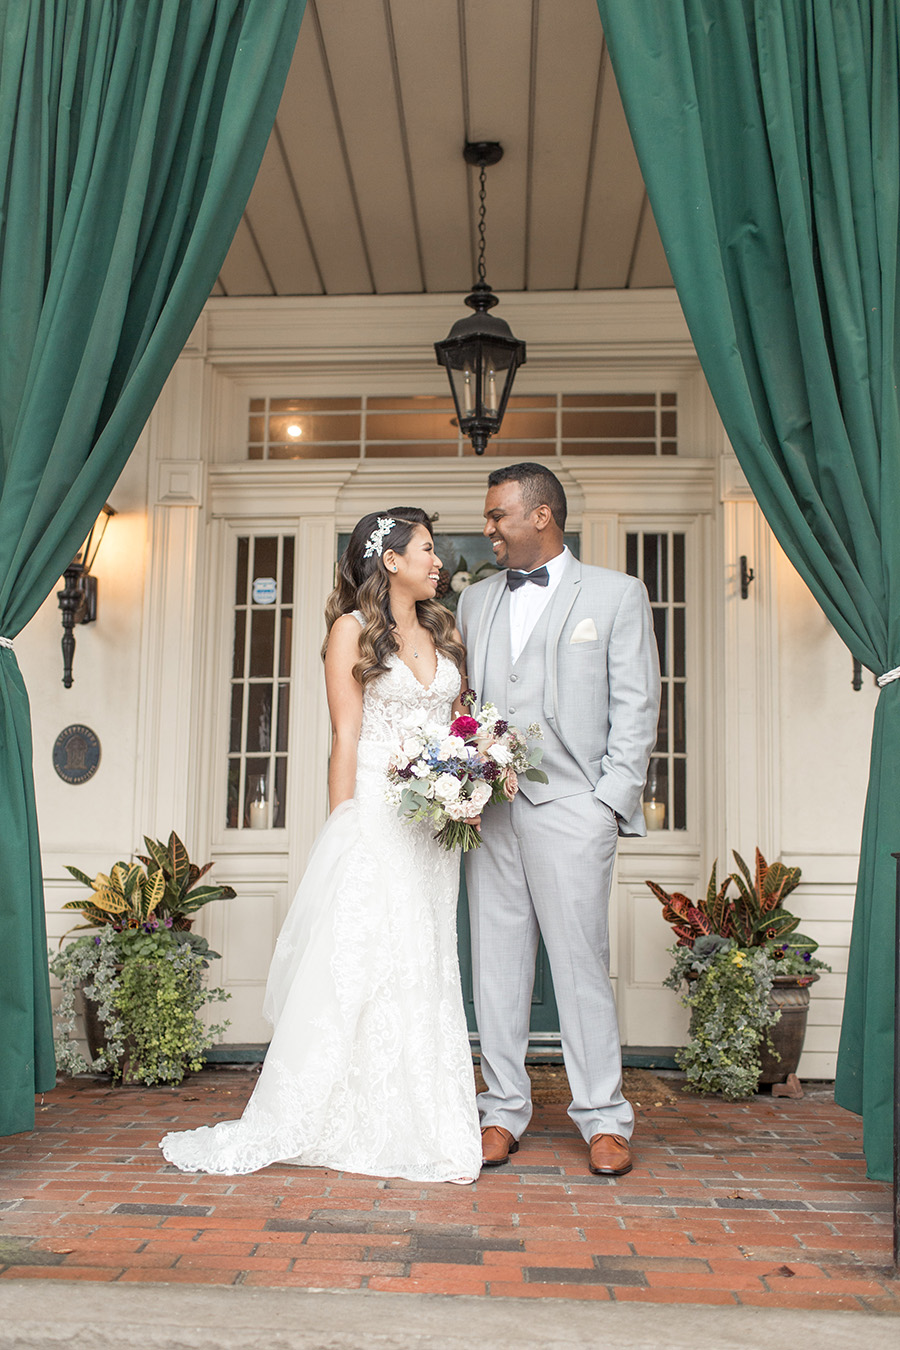 Wedding day portraits on the porch at David's Country Inn